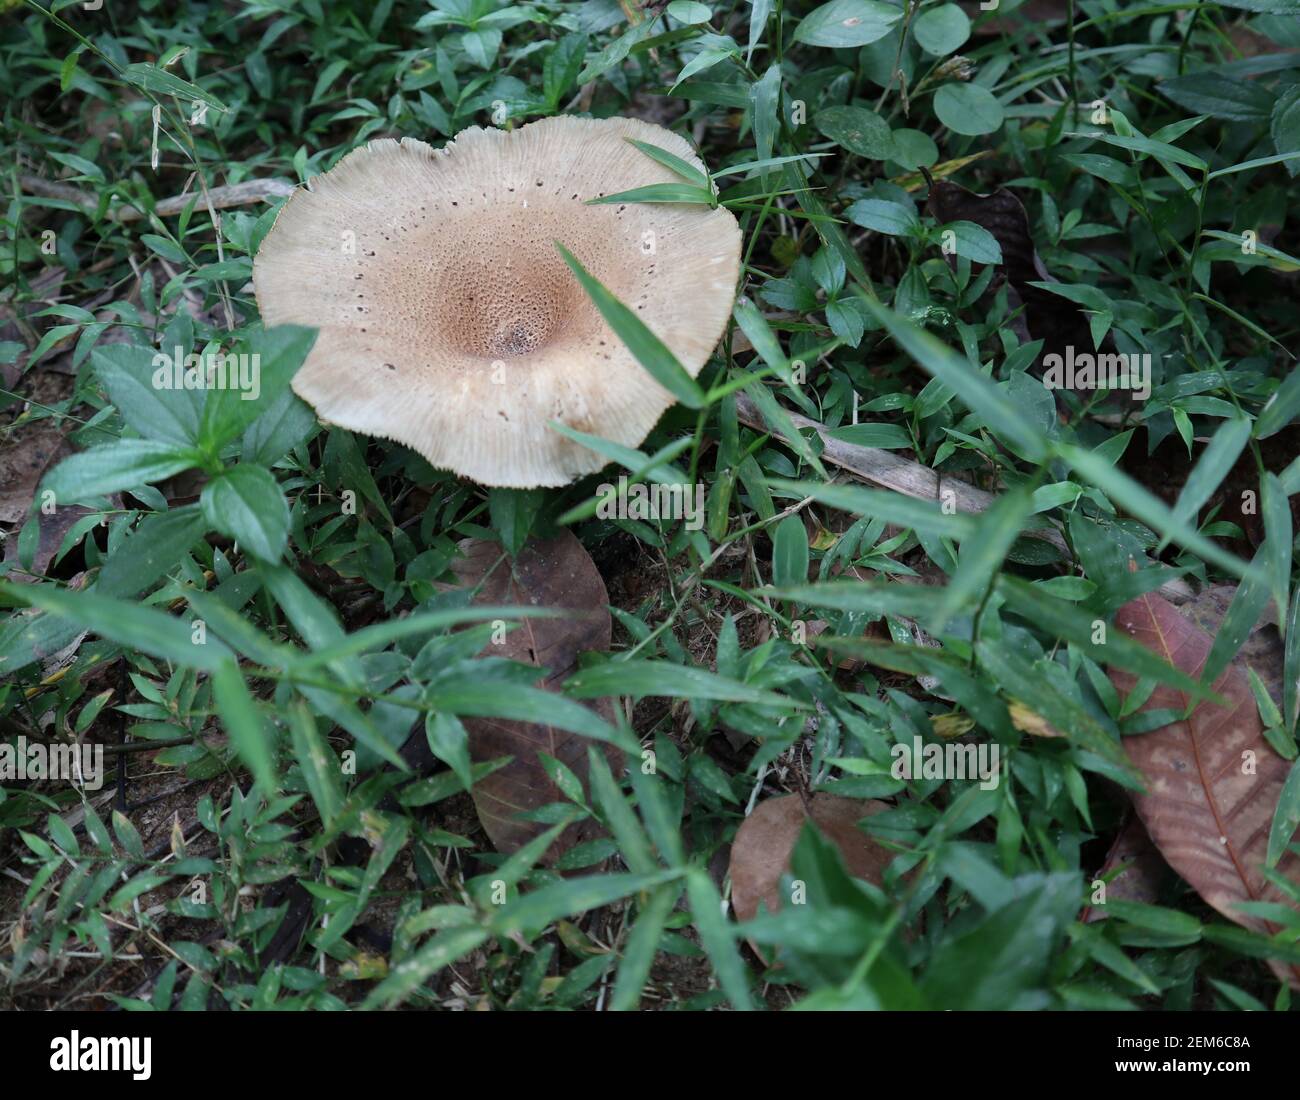 Few grass leaves and large mushroom on the ground Stock Photo